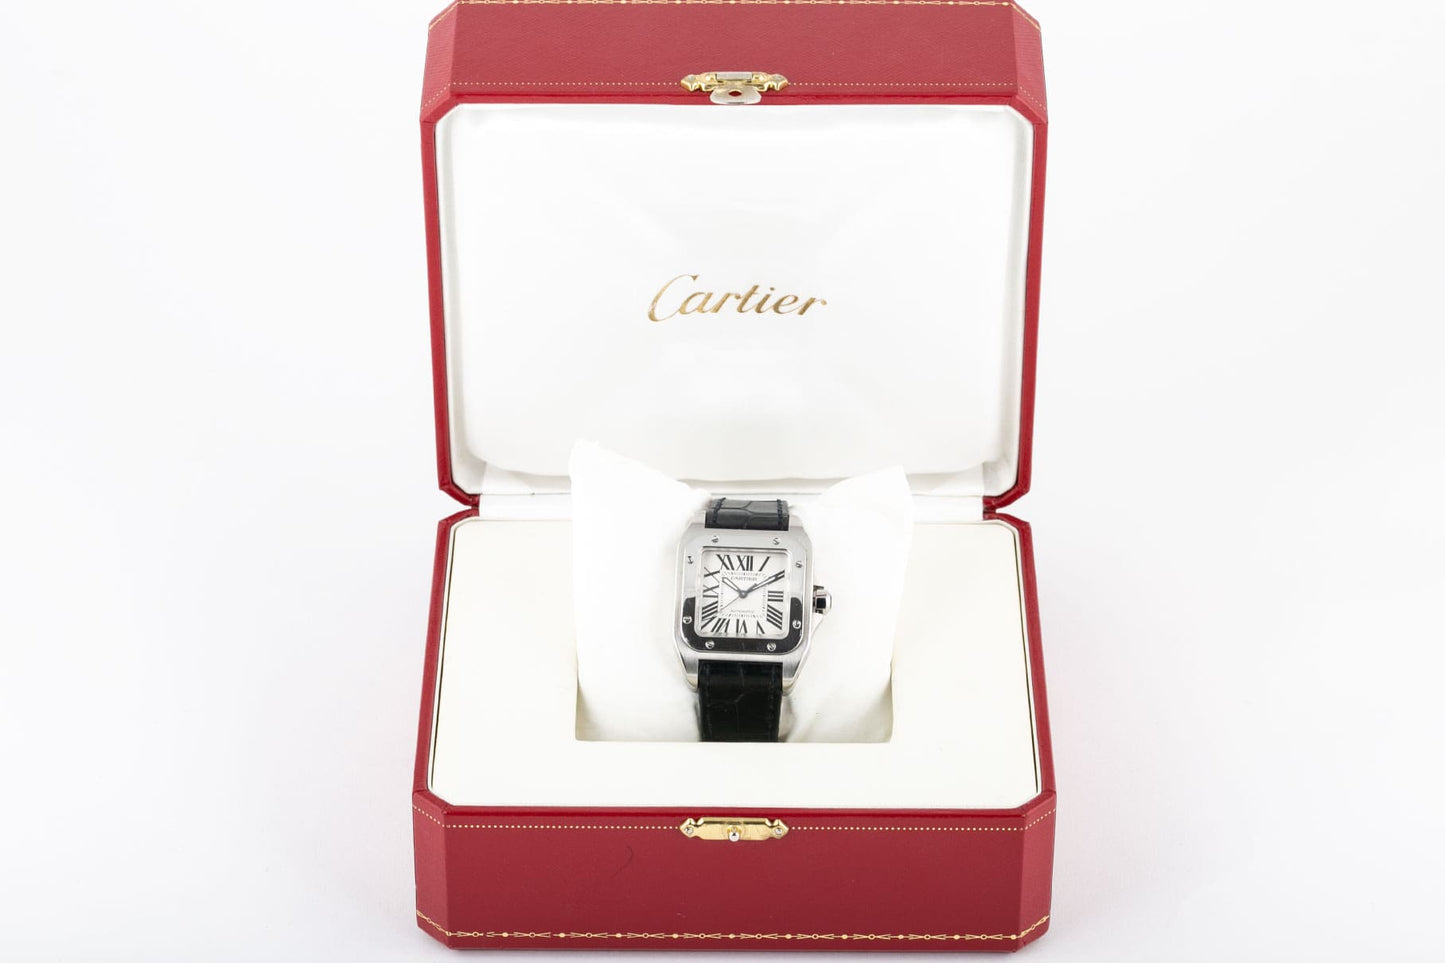 Cartier Santos 100 Automatic Watch 2878 Mid size 33mm - Wilson Watches 